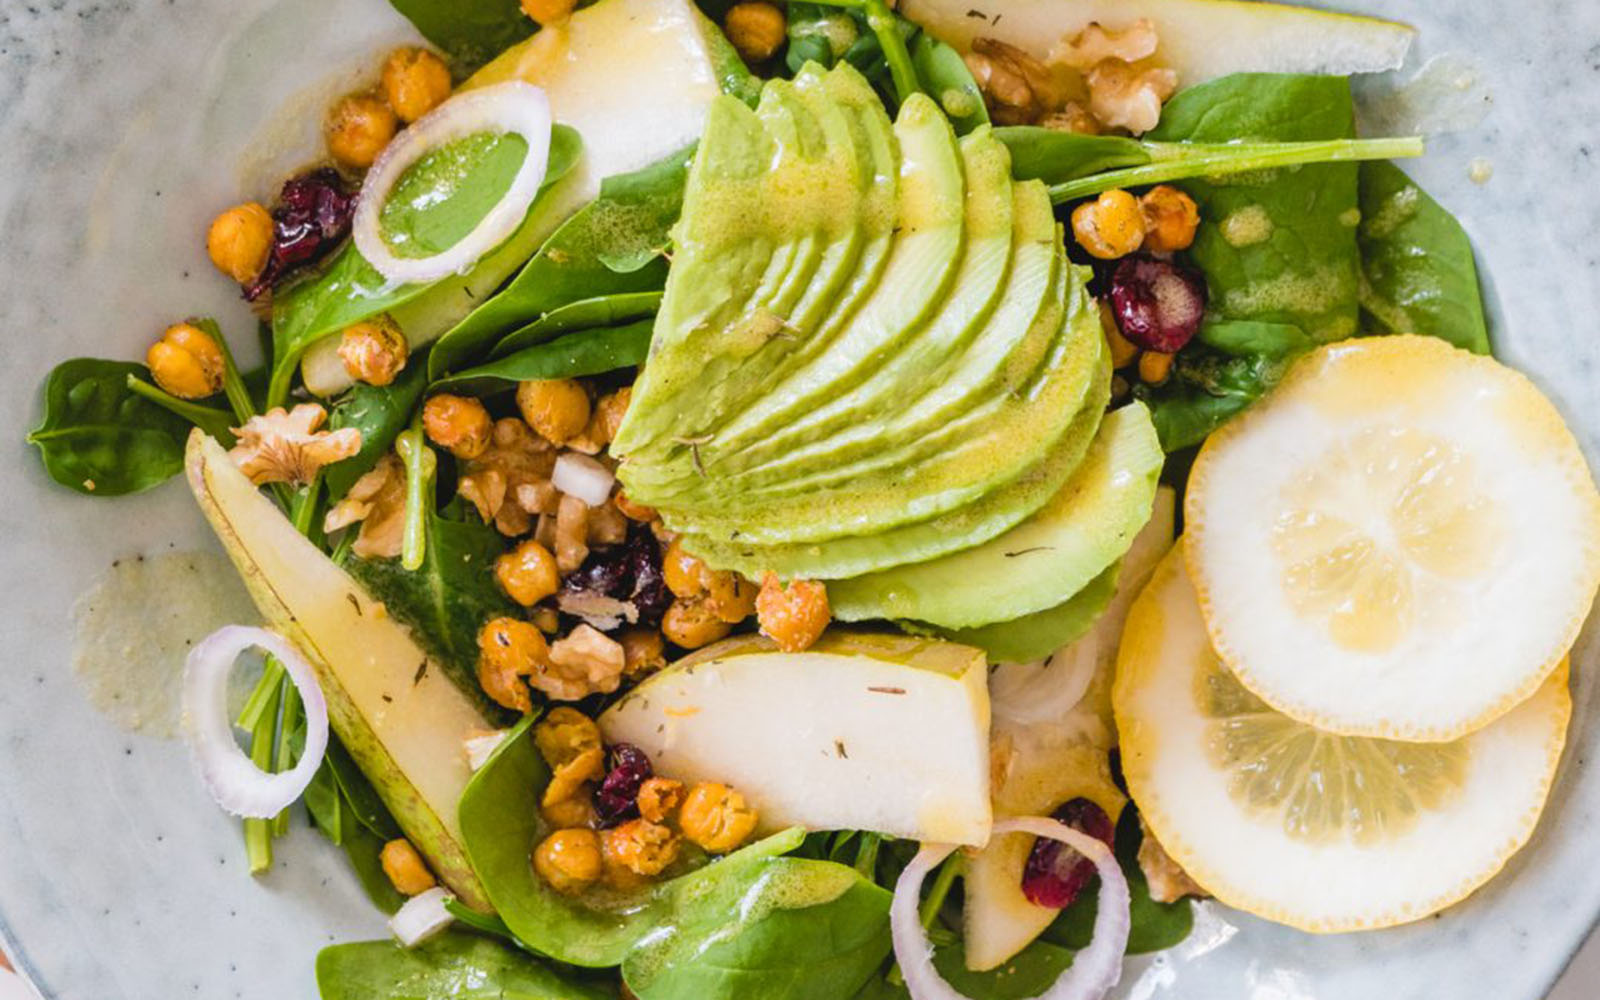 Pear Salad with Crispy Chickpea Croutons